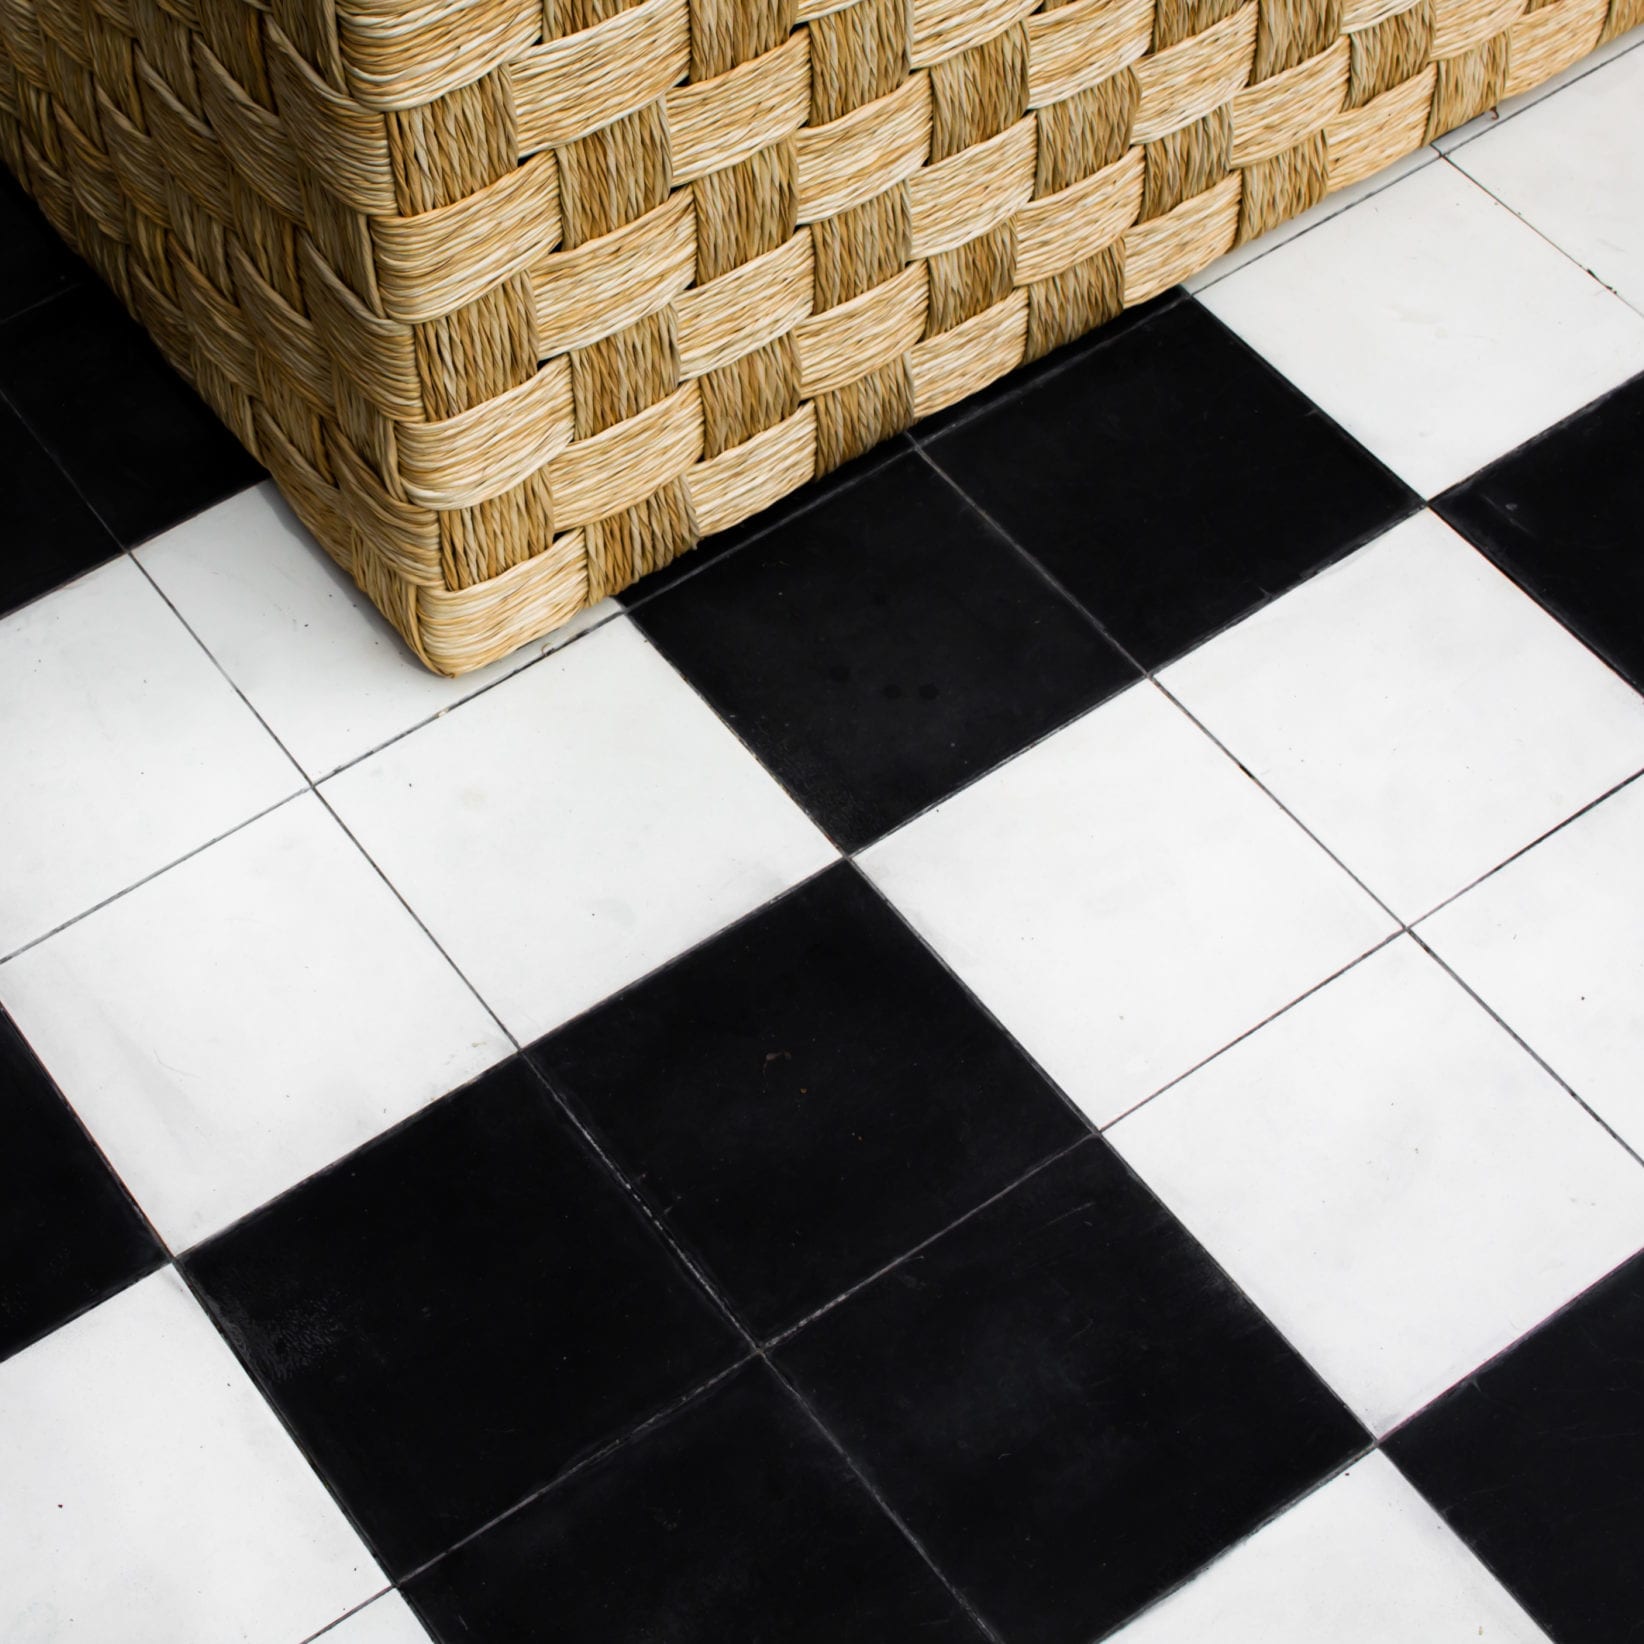 clé tile solid black cement square tiles on the steps of an outdoor patio